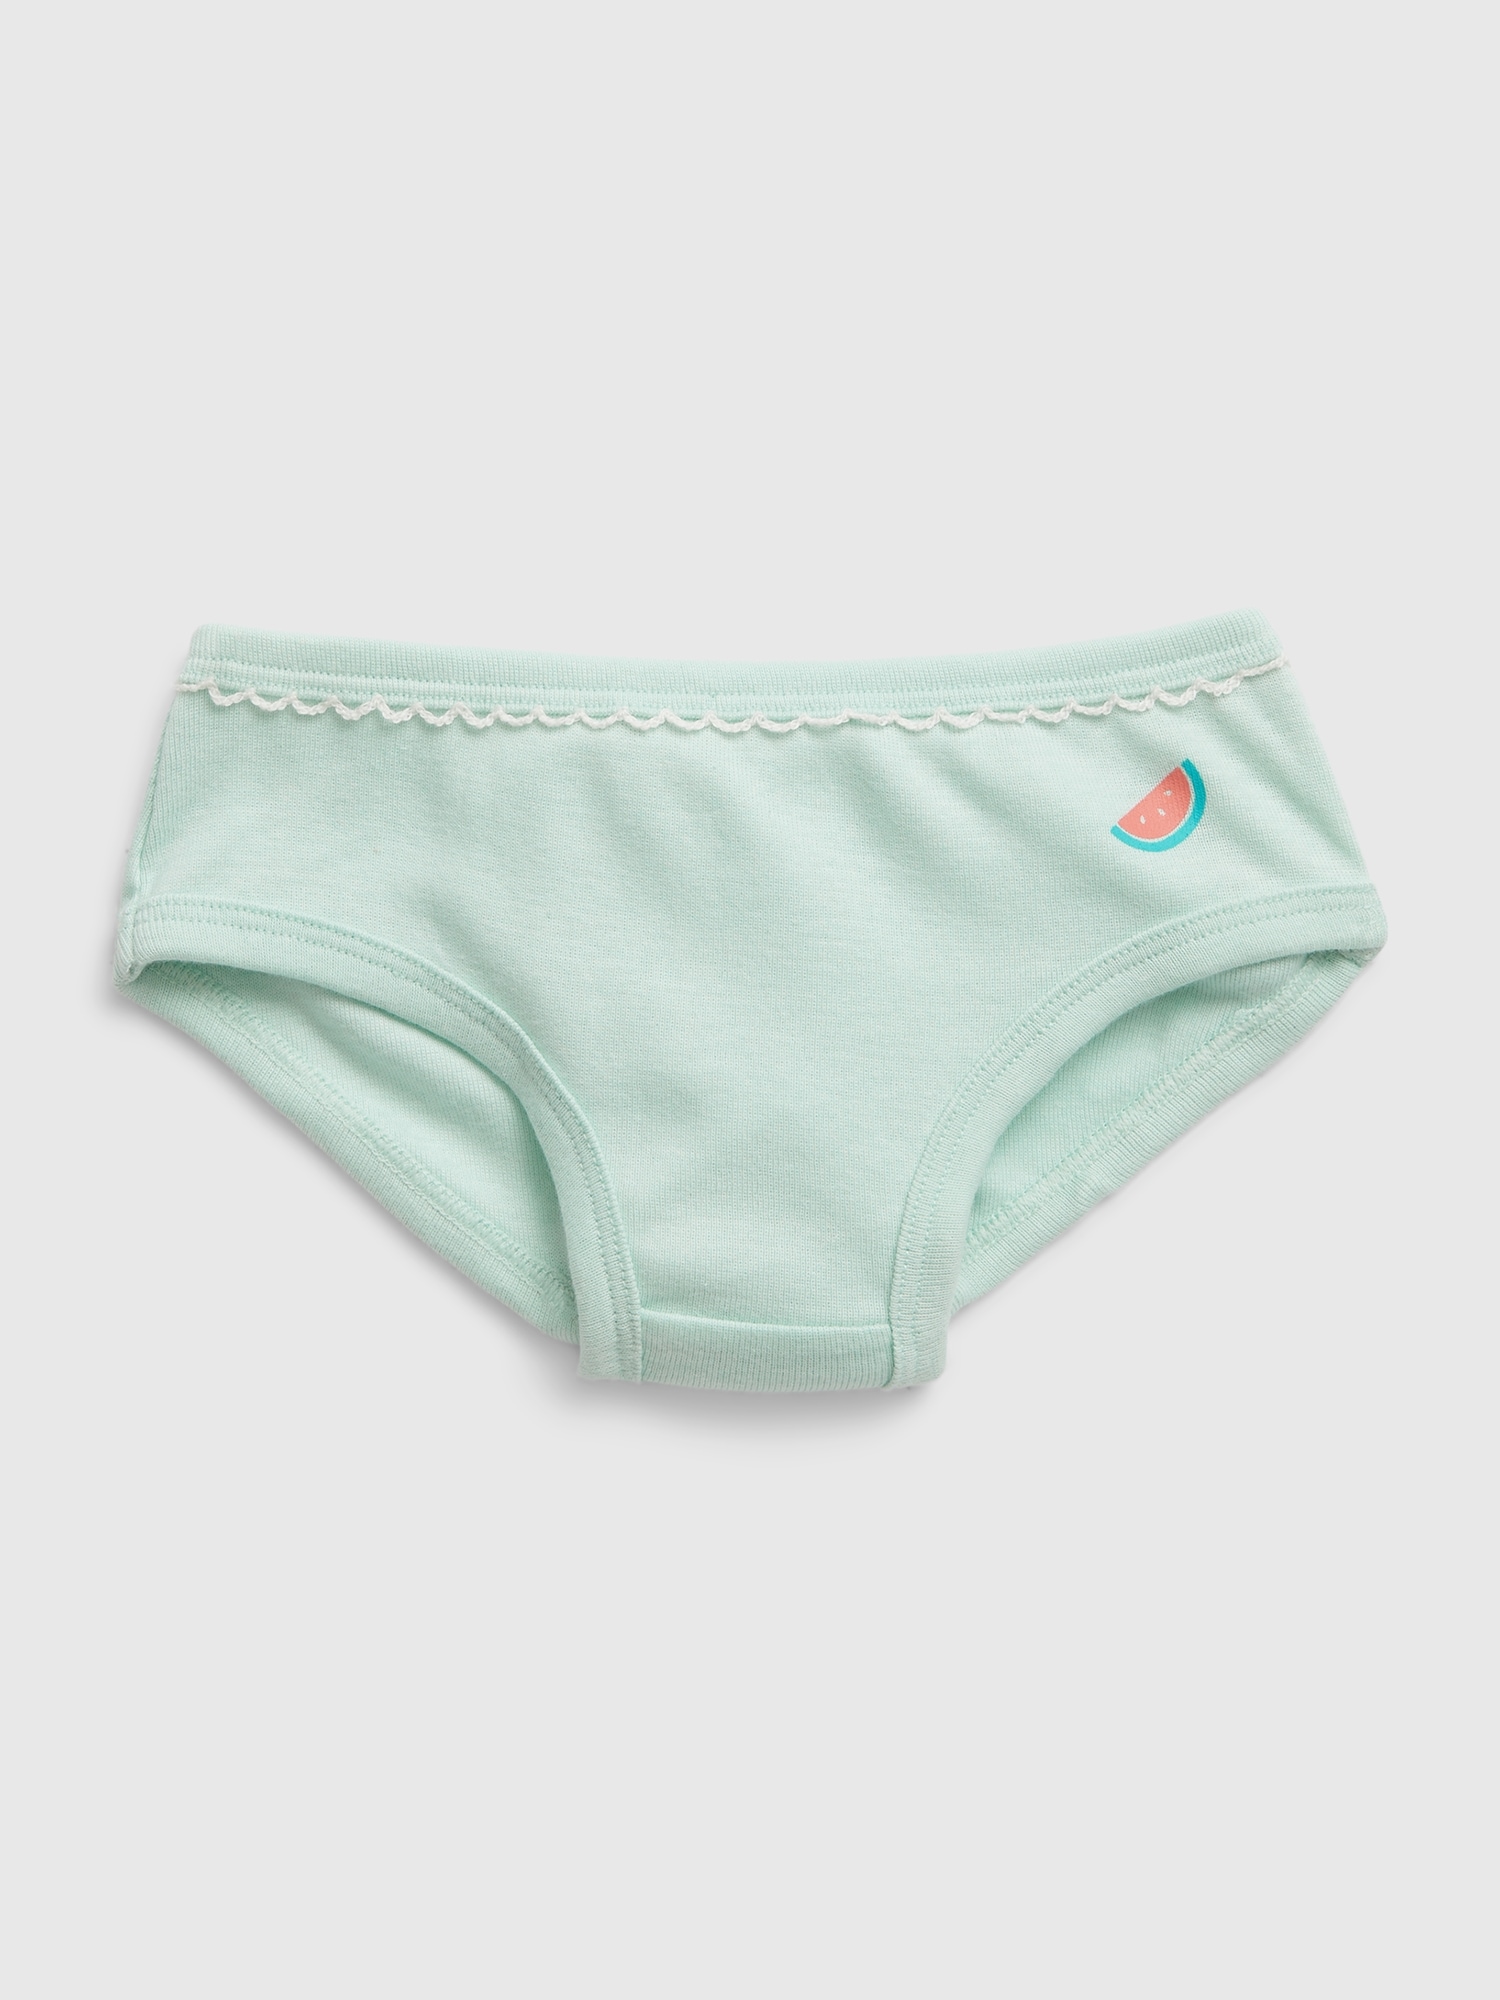 Cottonique - There's no better day to get the best underwear than today!  Happy National Underwear Day! #Cottonique #GoOrganic #AllergyFree